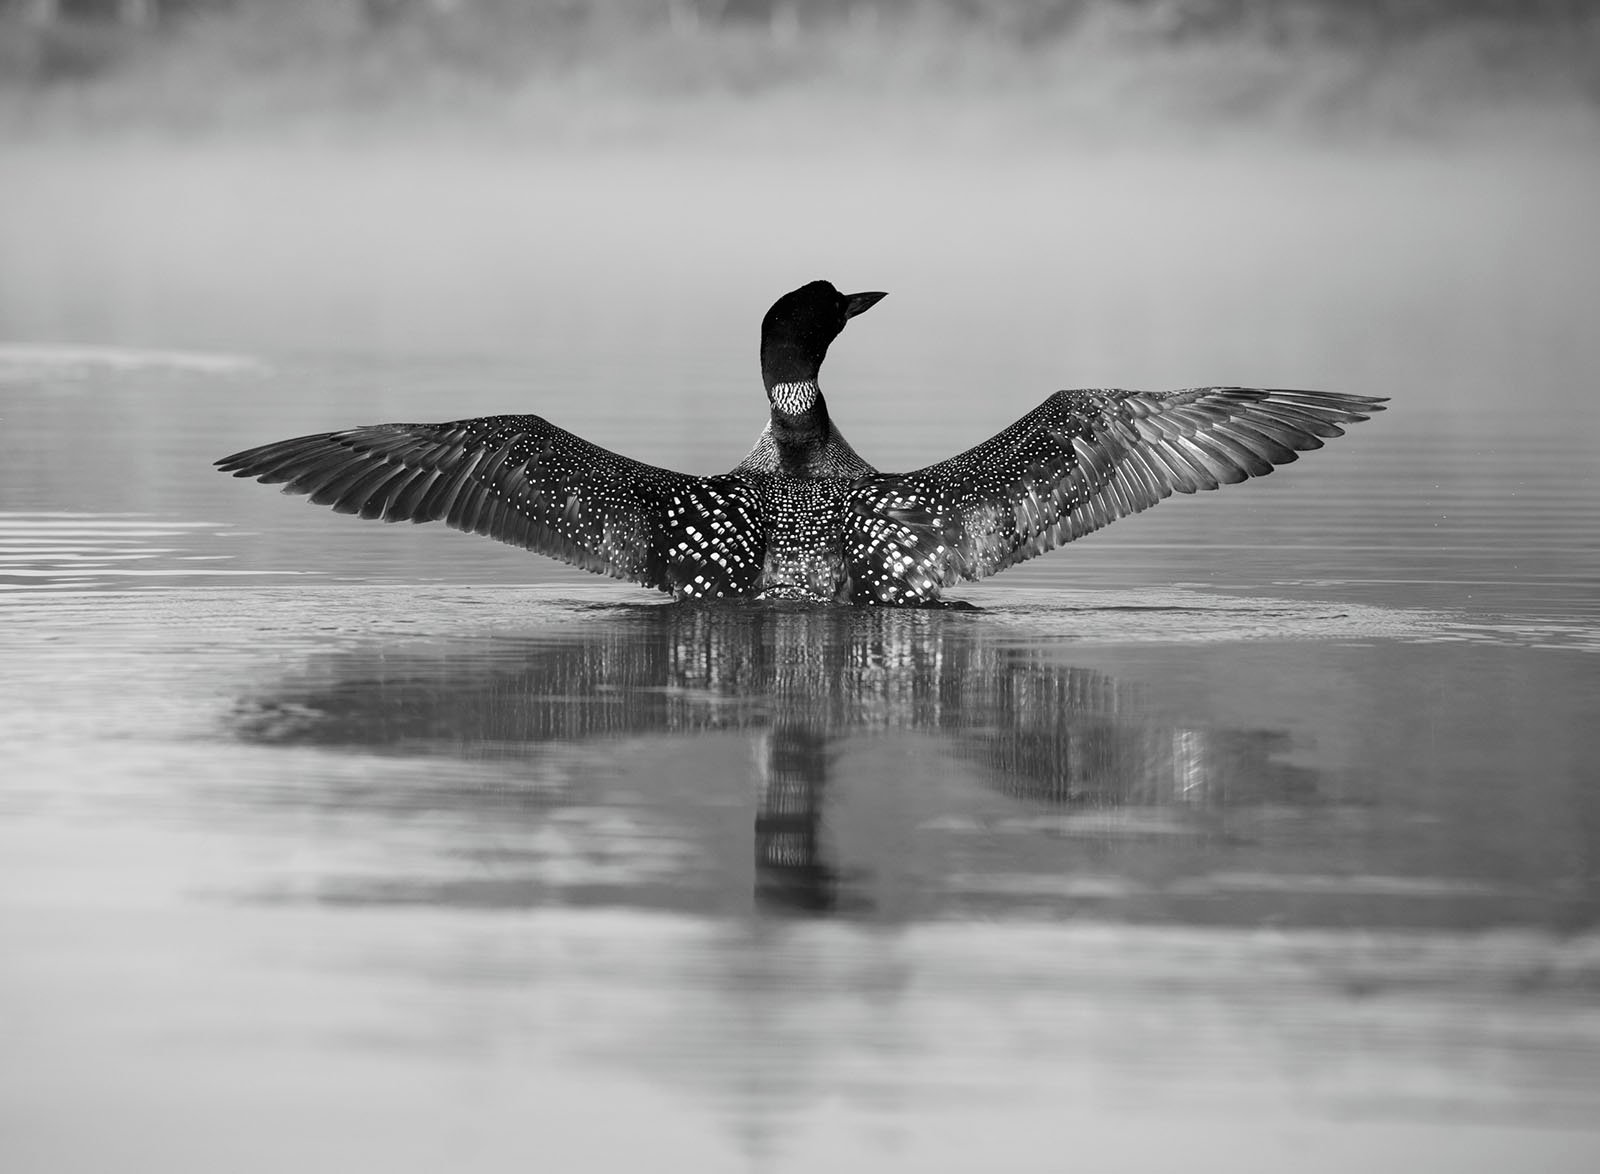 In the black and white image, a loon spreads its wings and floats on a foggy lake, creating a perfect reflection in the calm water.